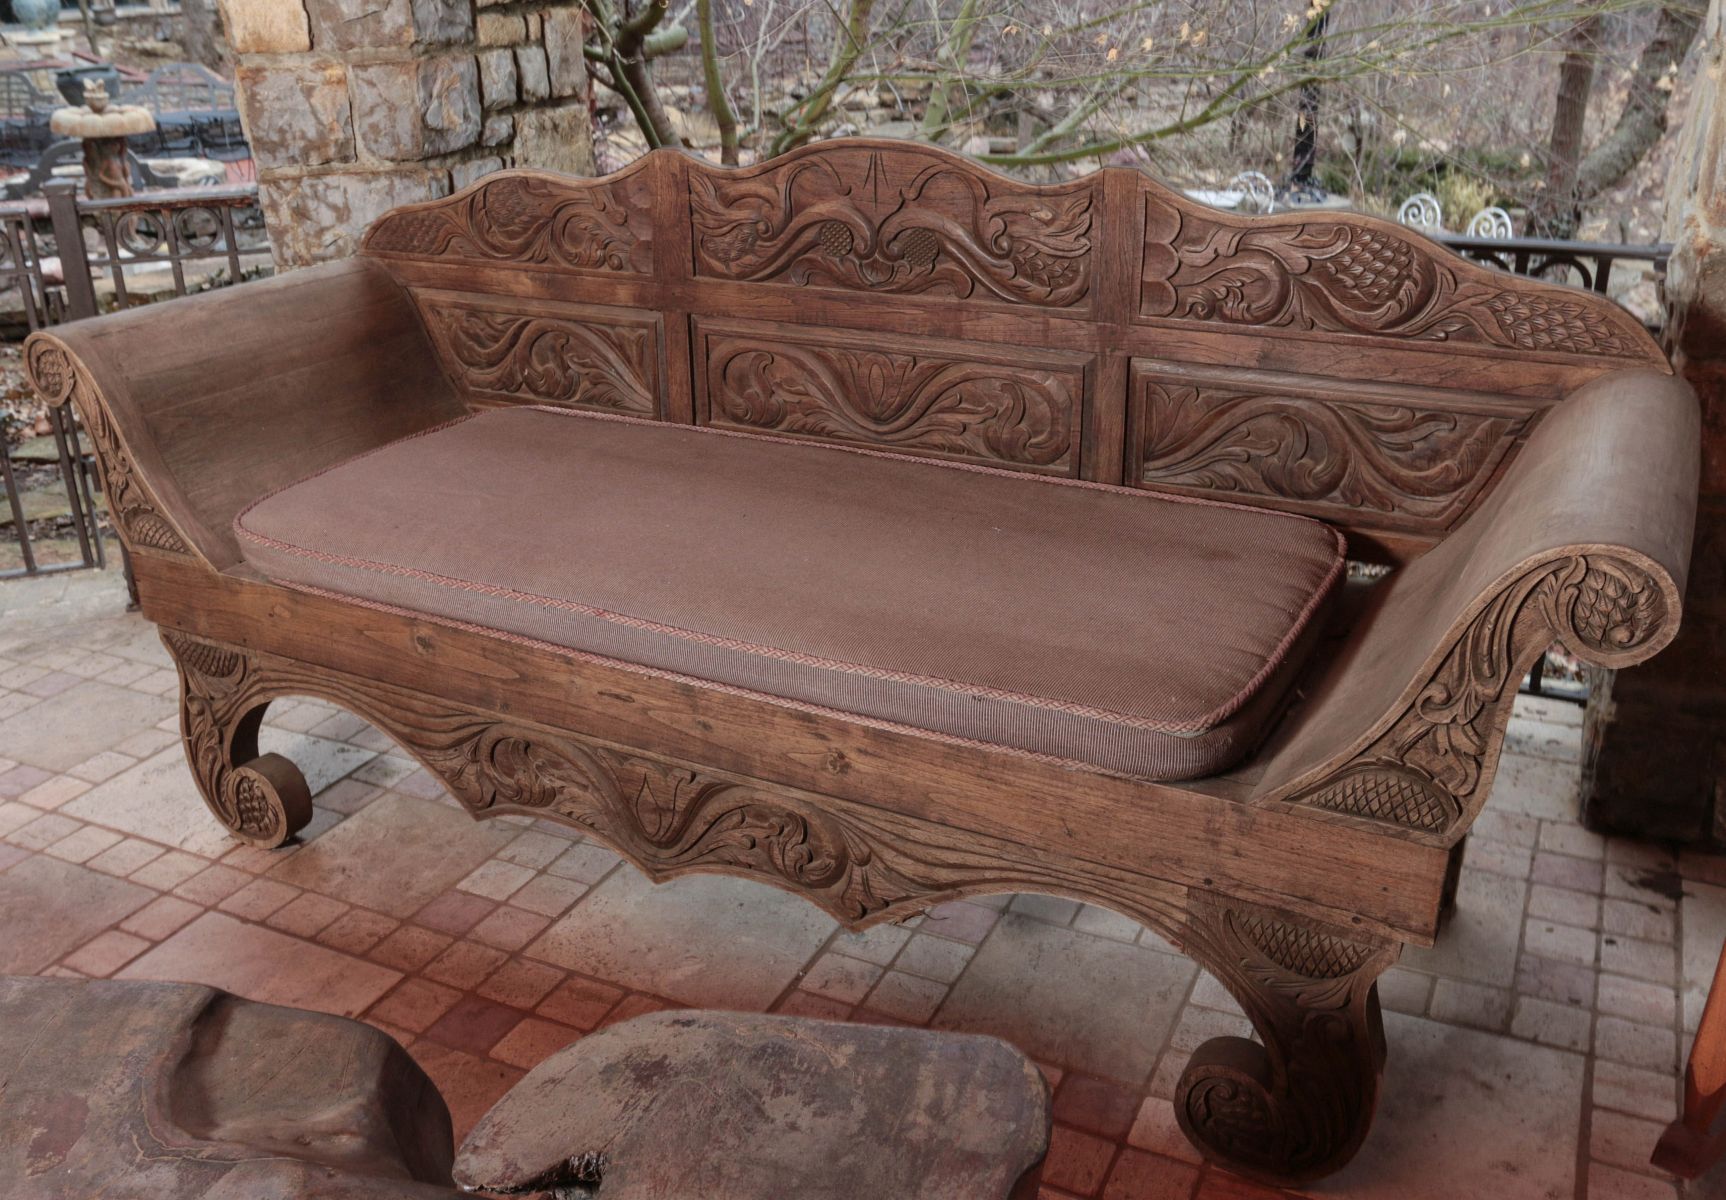 AN ORNATE ASIAN TEAK WOOD BENCH CARVED OVERALL